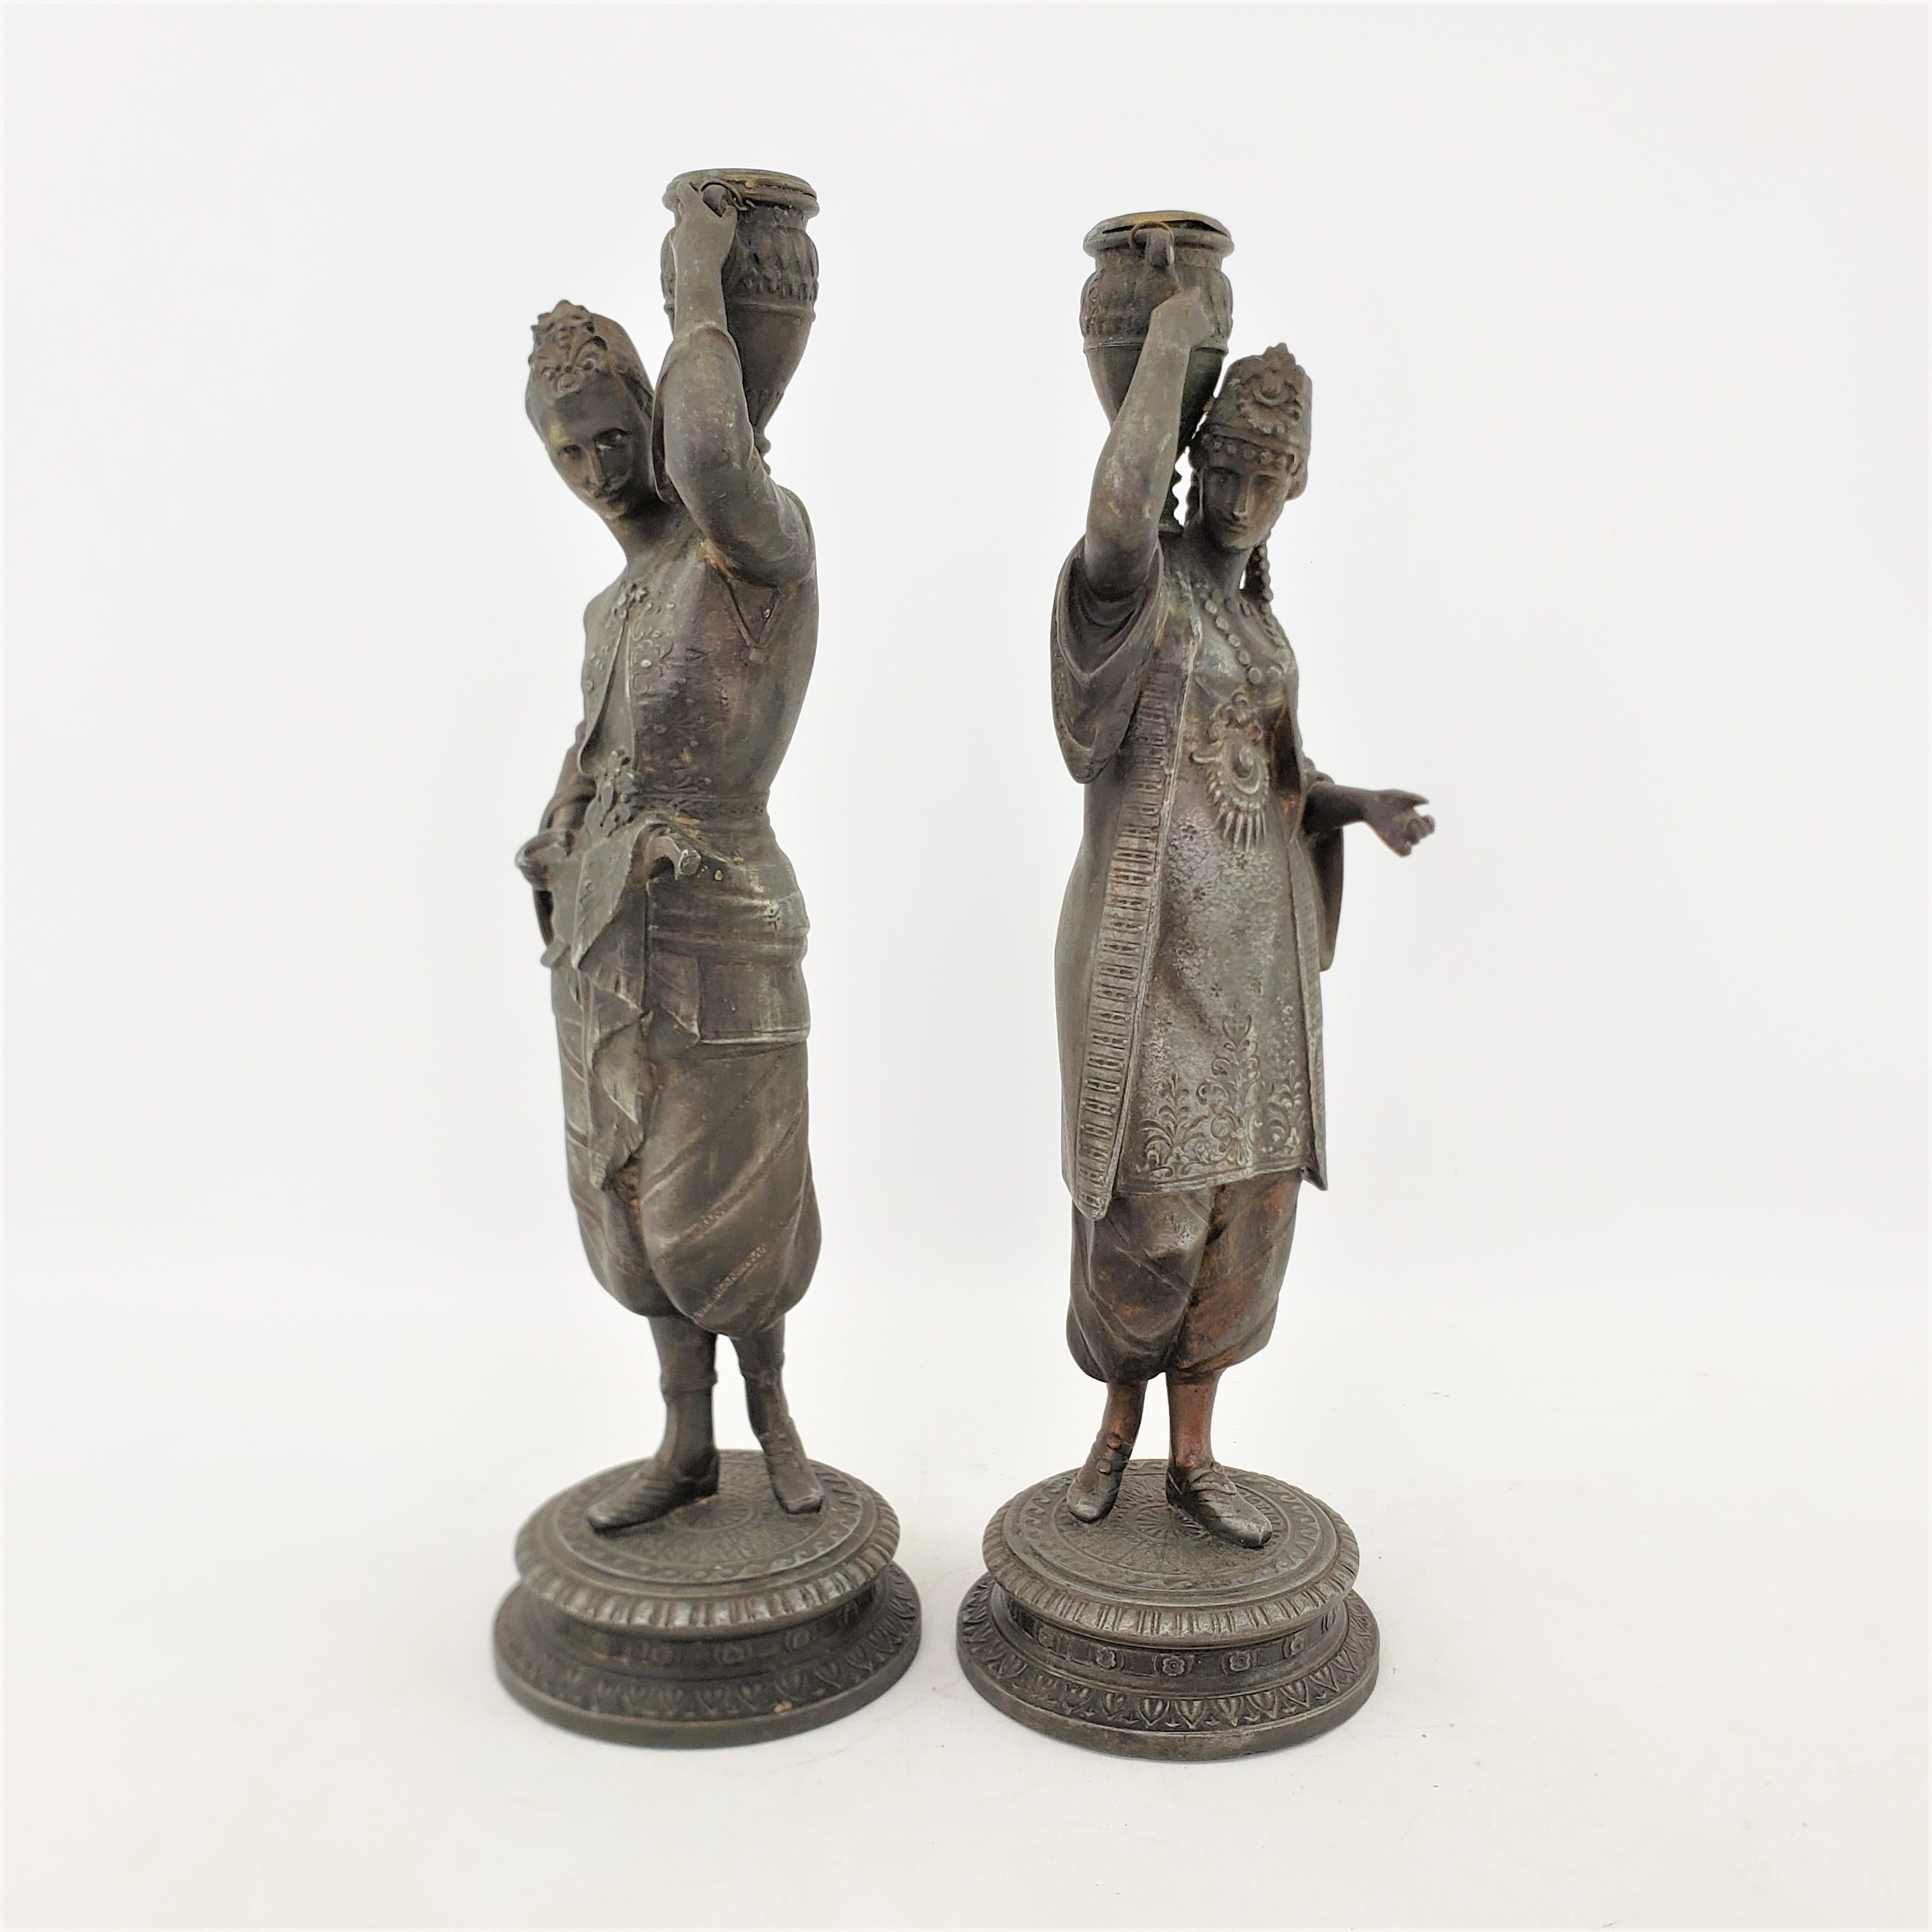 This pair of antique candlesticks are unsigned, but presumed to have originated from Austria and date to approximately 1900 and done in a Neoclassical Revival style. These sculptural candlesticks are composed of spelter with a patinated finish and